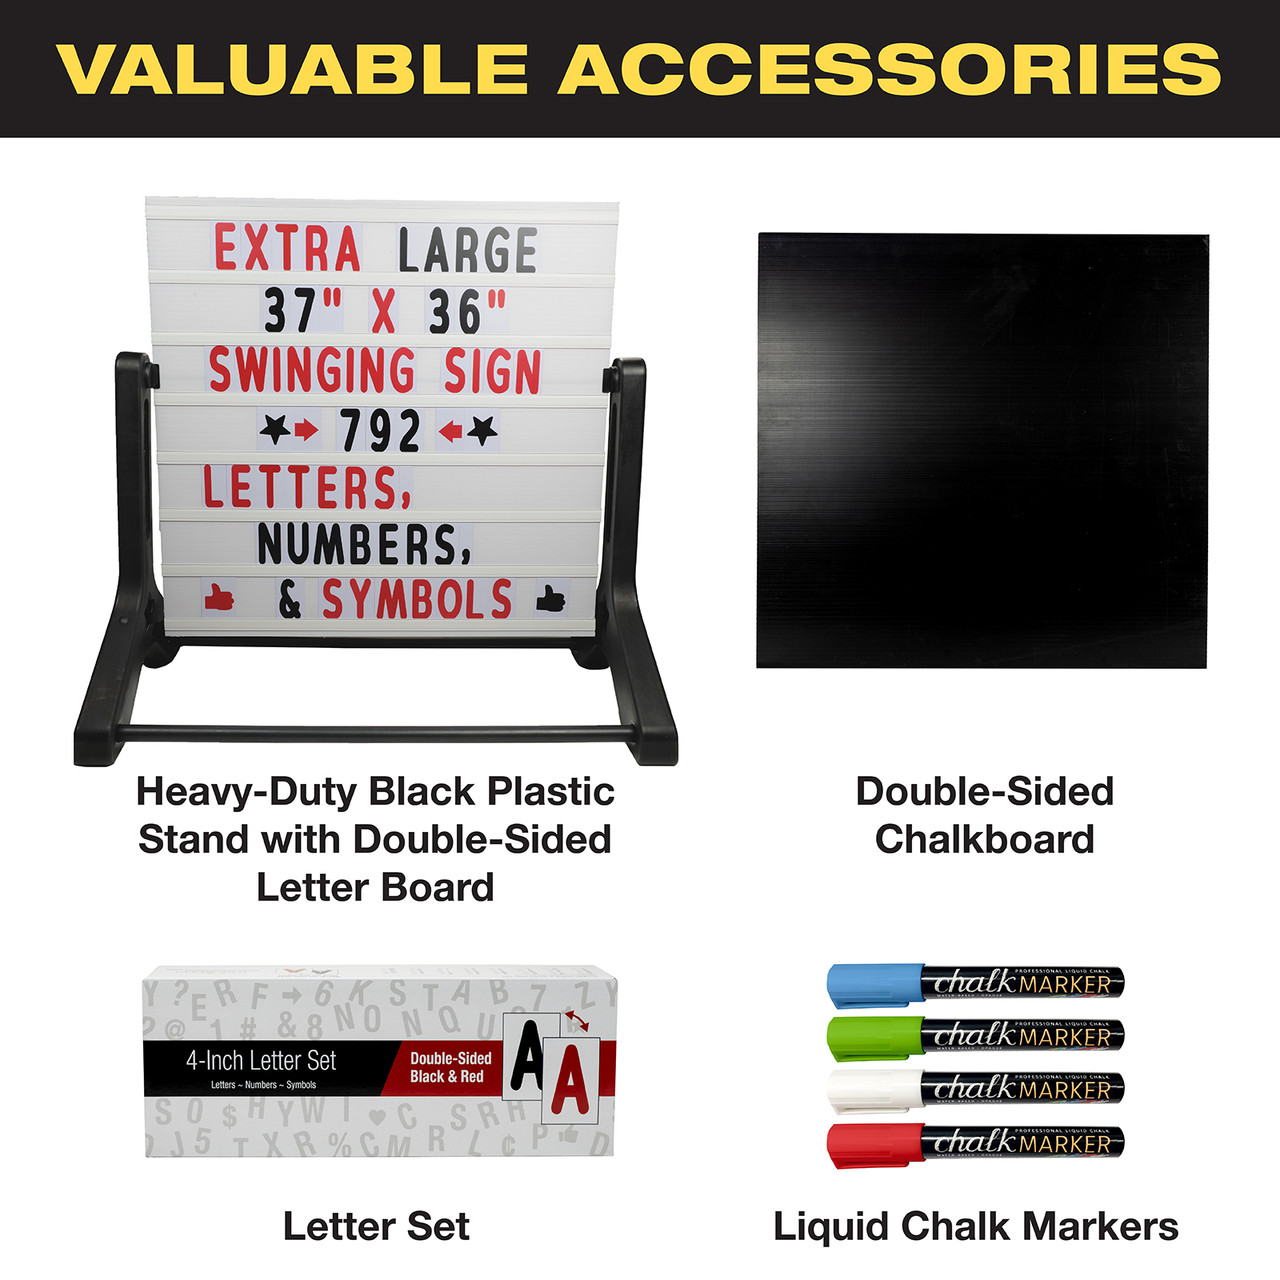 Large Wooden A-Frame Sidewalk Sign 36x20 Felt Letter Board w/ Changeable  Letters - EGP-HD-0084 - Excello Global Brands